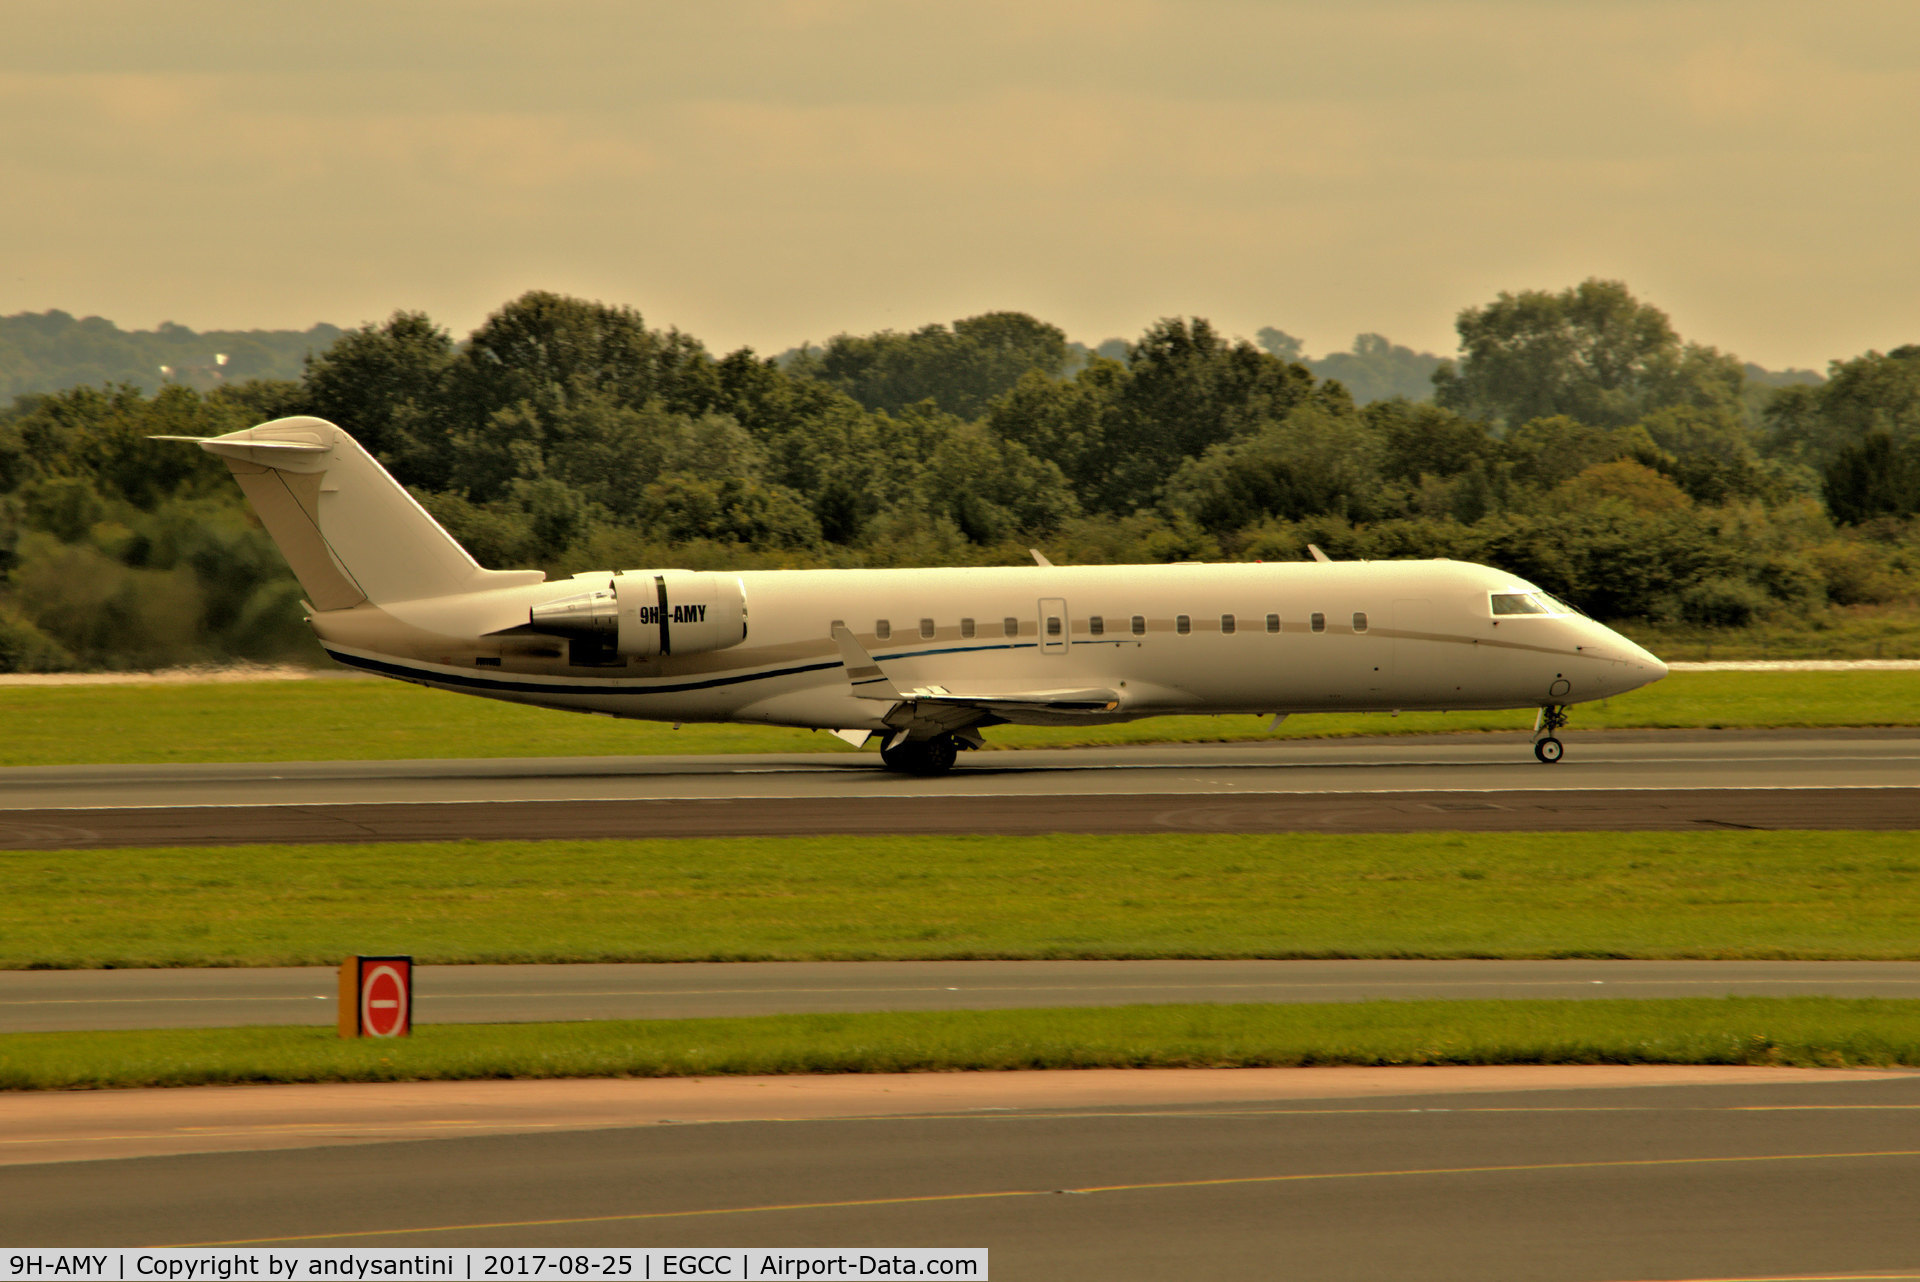 9H-AMY, 2007 Bombardier Challenger 850 (CL-600-2B19) C/N 8043, just landed on runway 23R